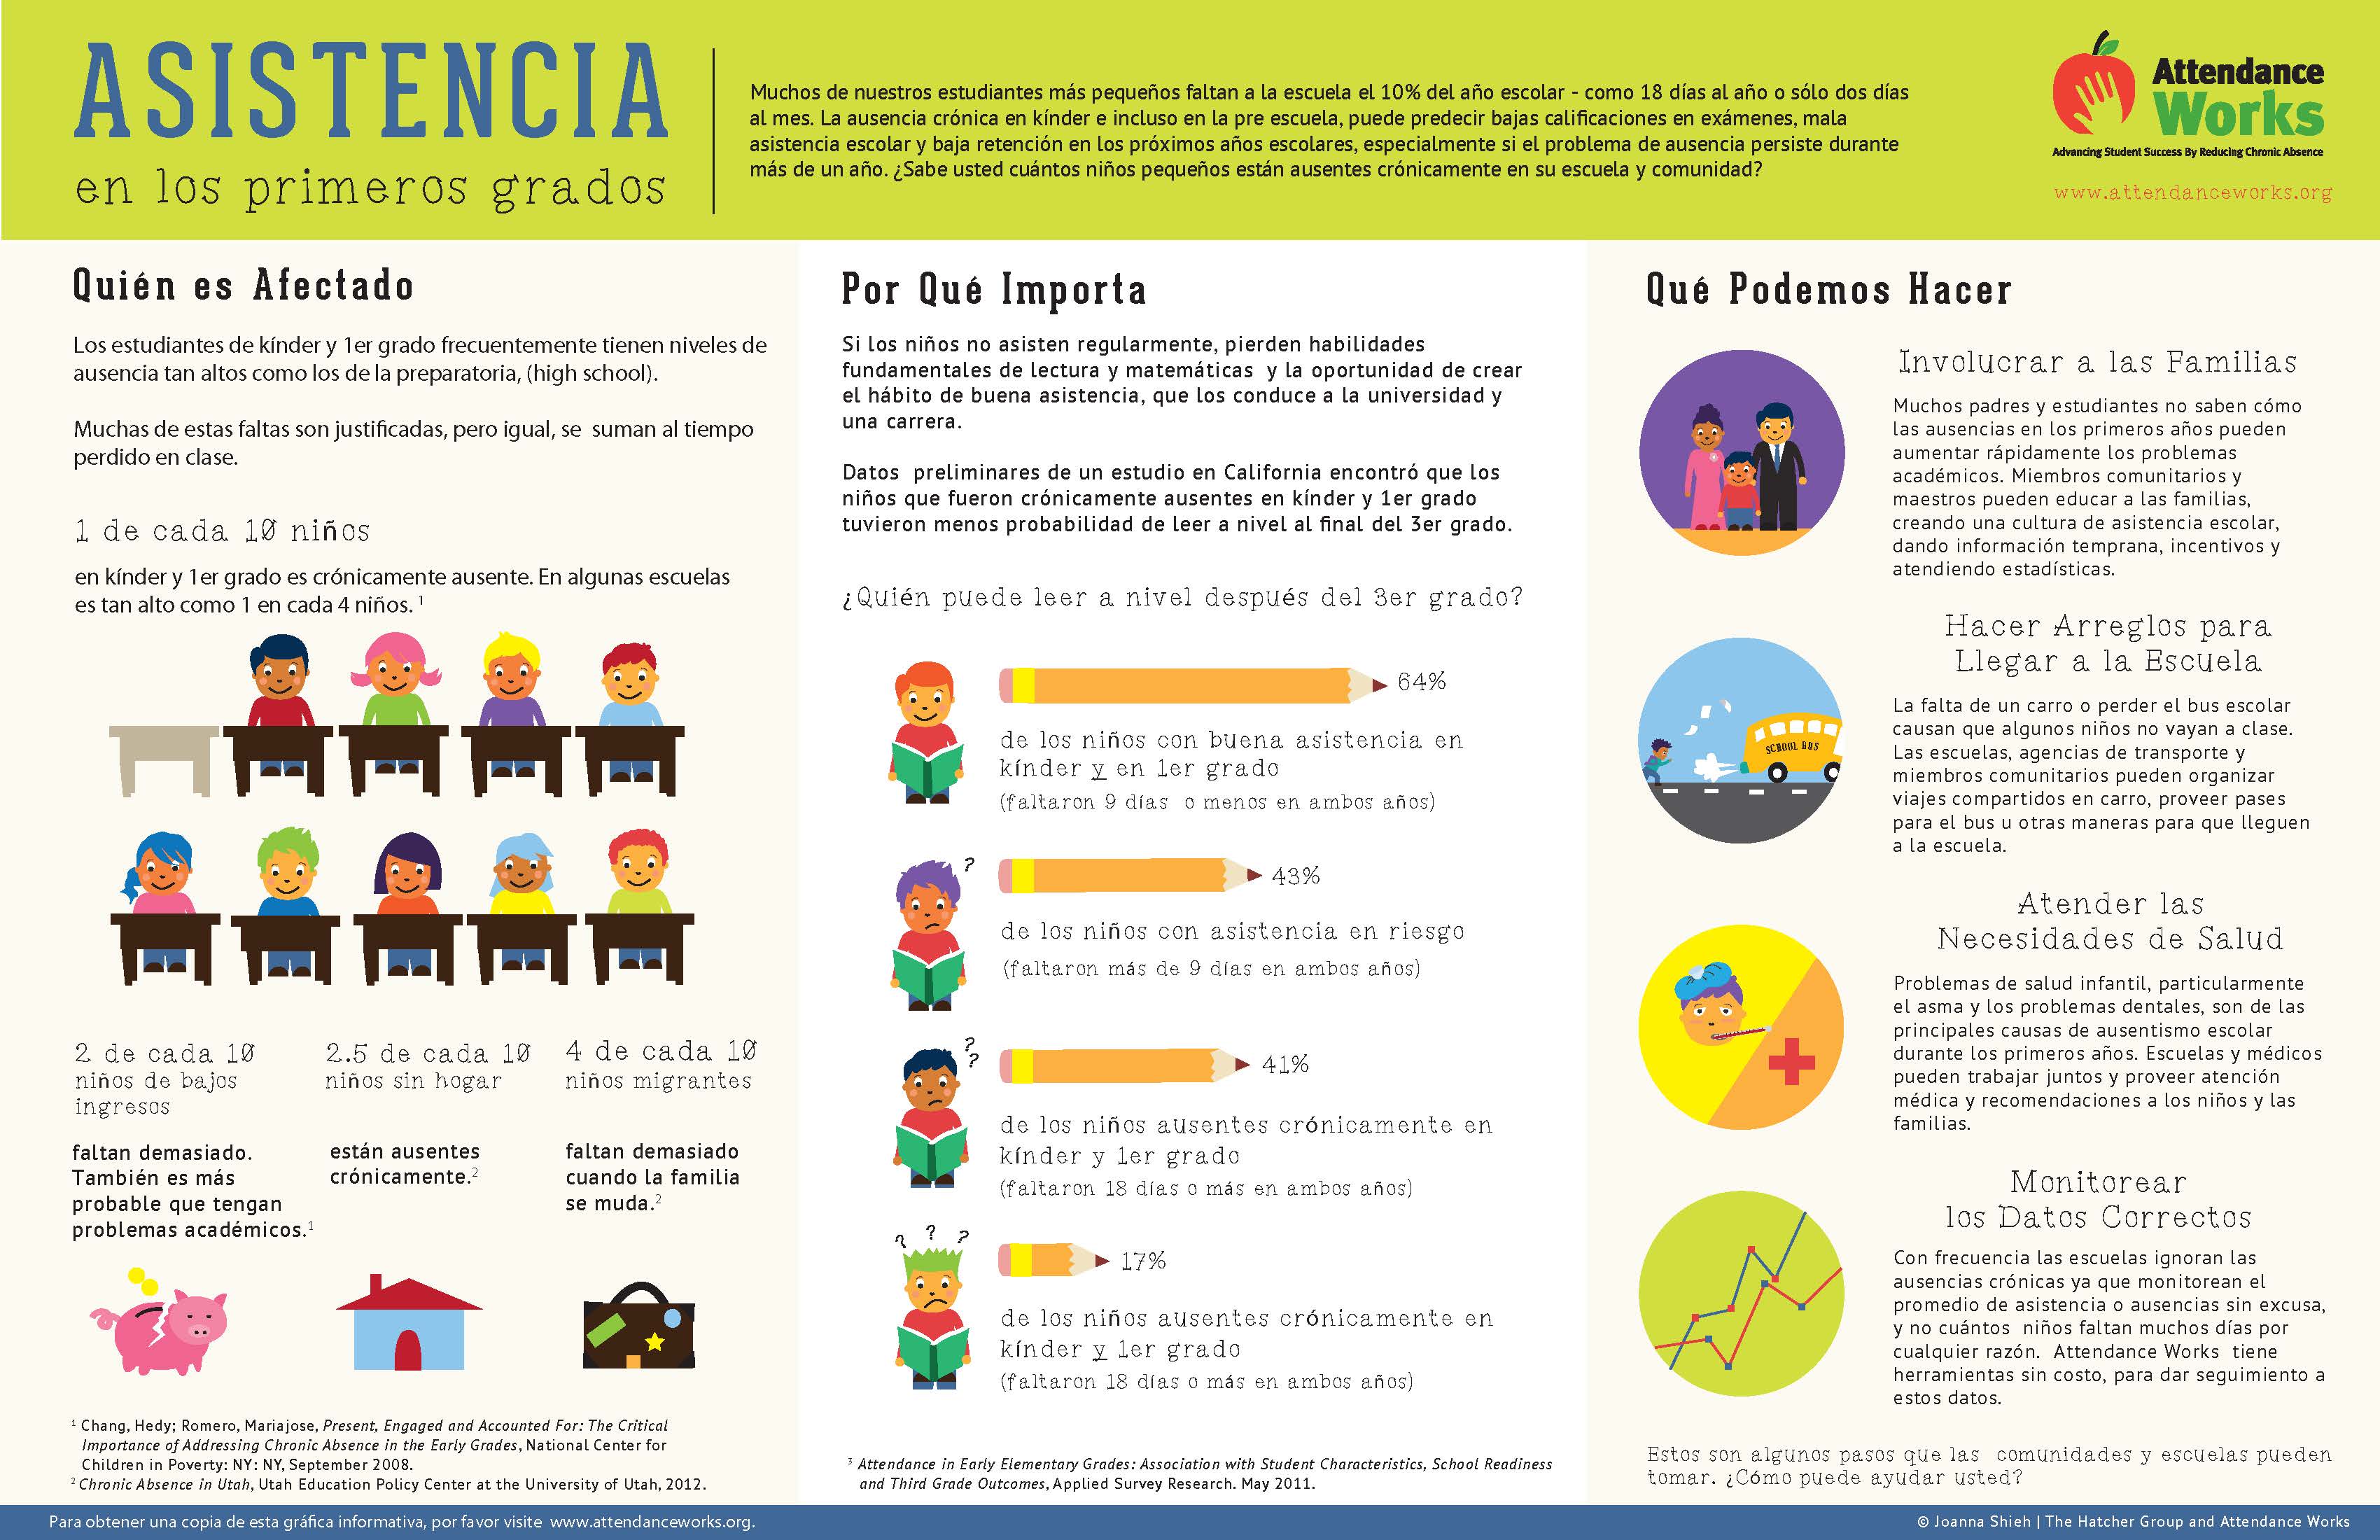 spanish version of graphic with points that support good attendance 